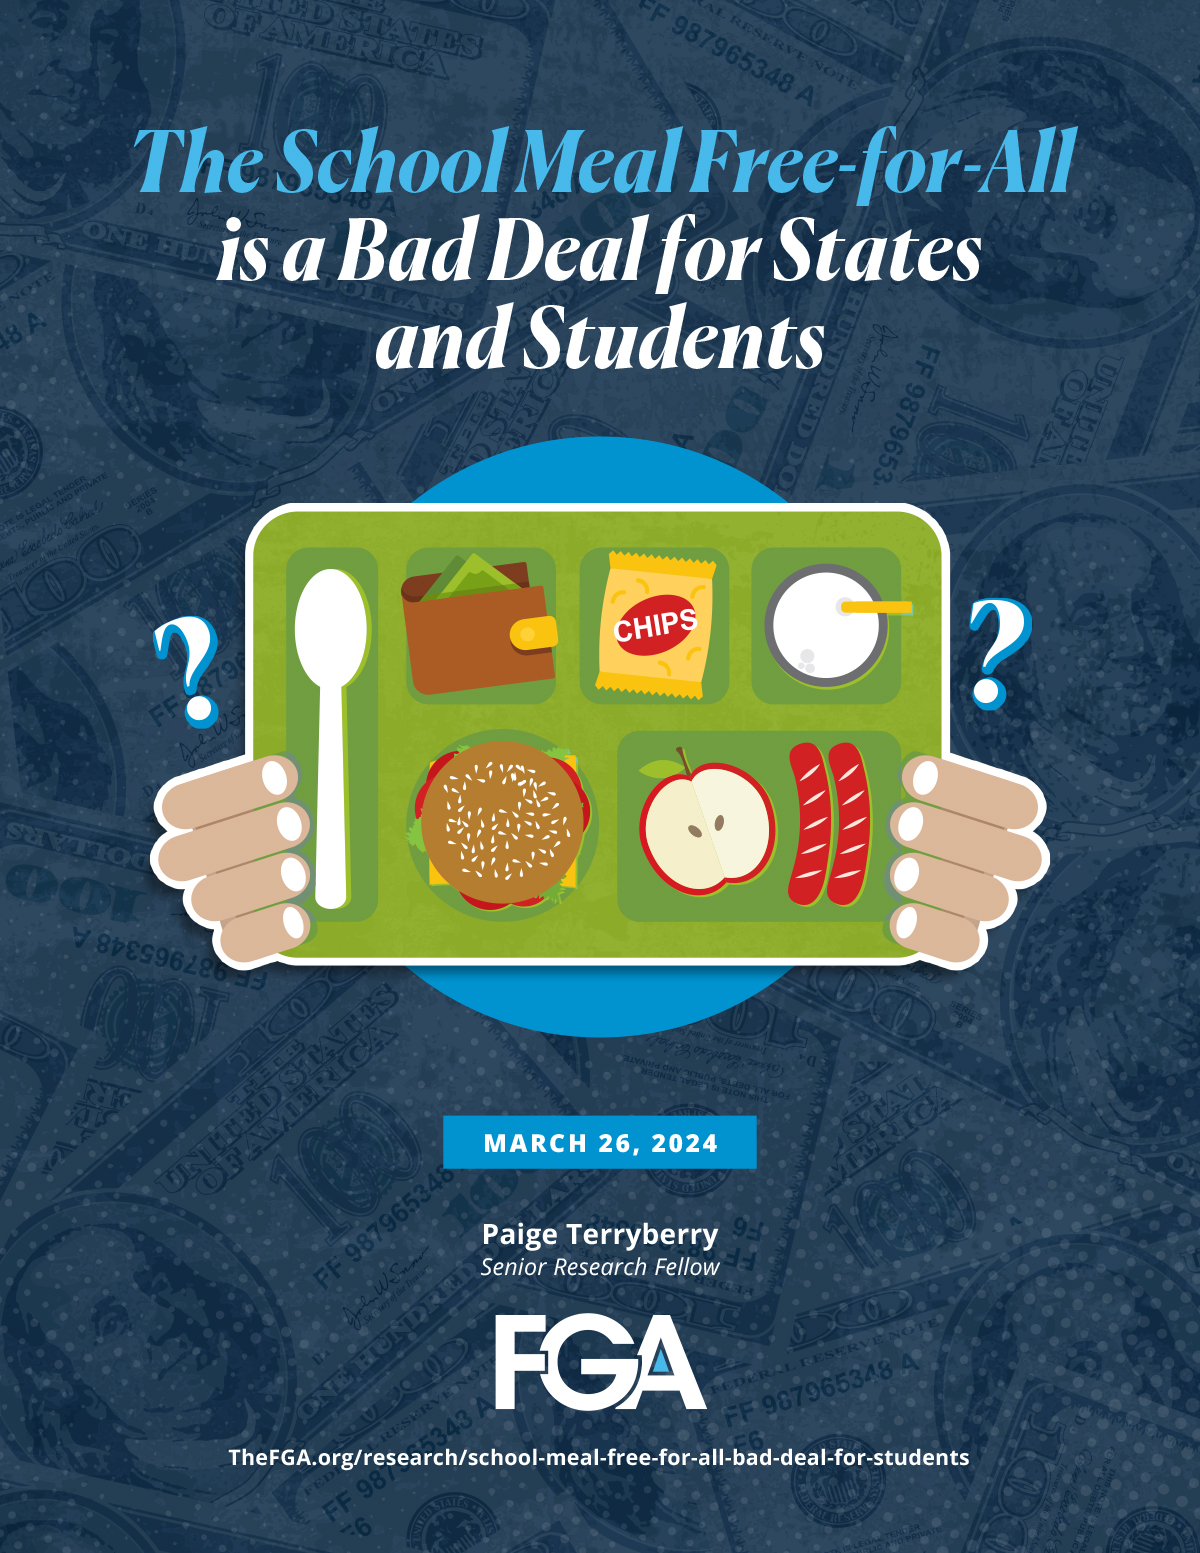 The School Meal Free-for-All is a Bad Deal for States and Students 